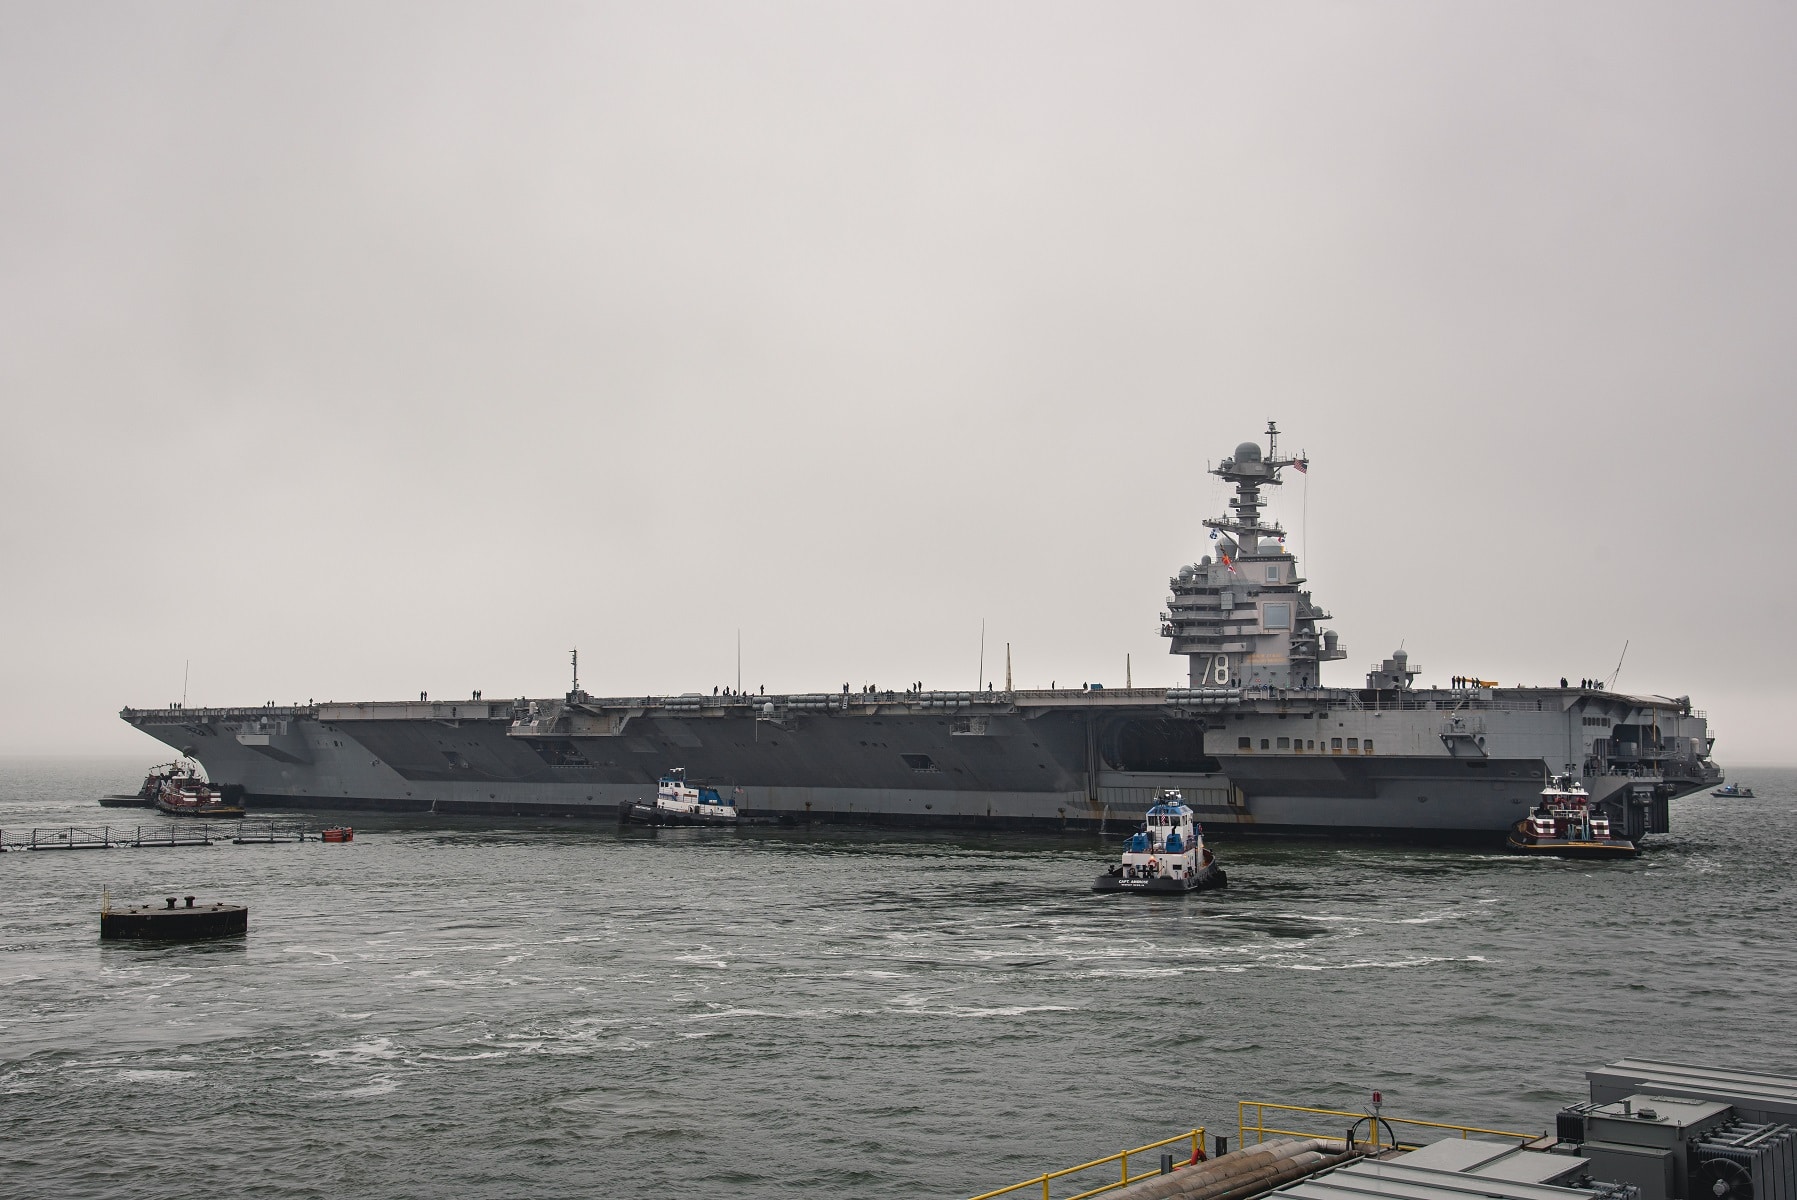 USS Gerald Ford Supercarrier Departs On First Combat, 50% OFF